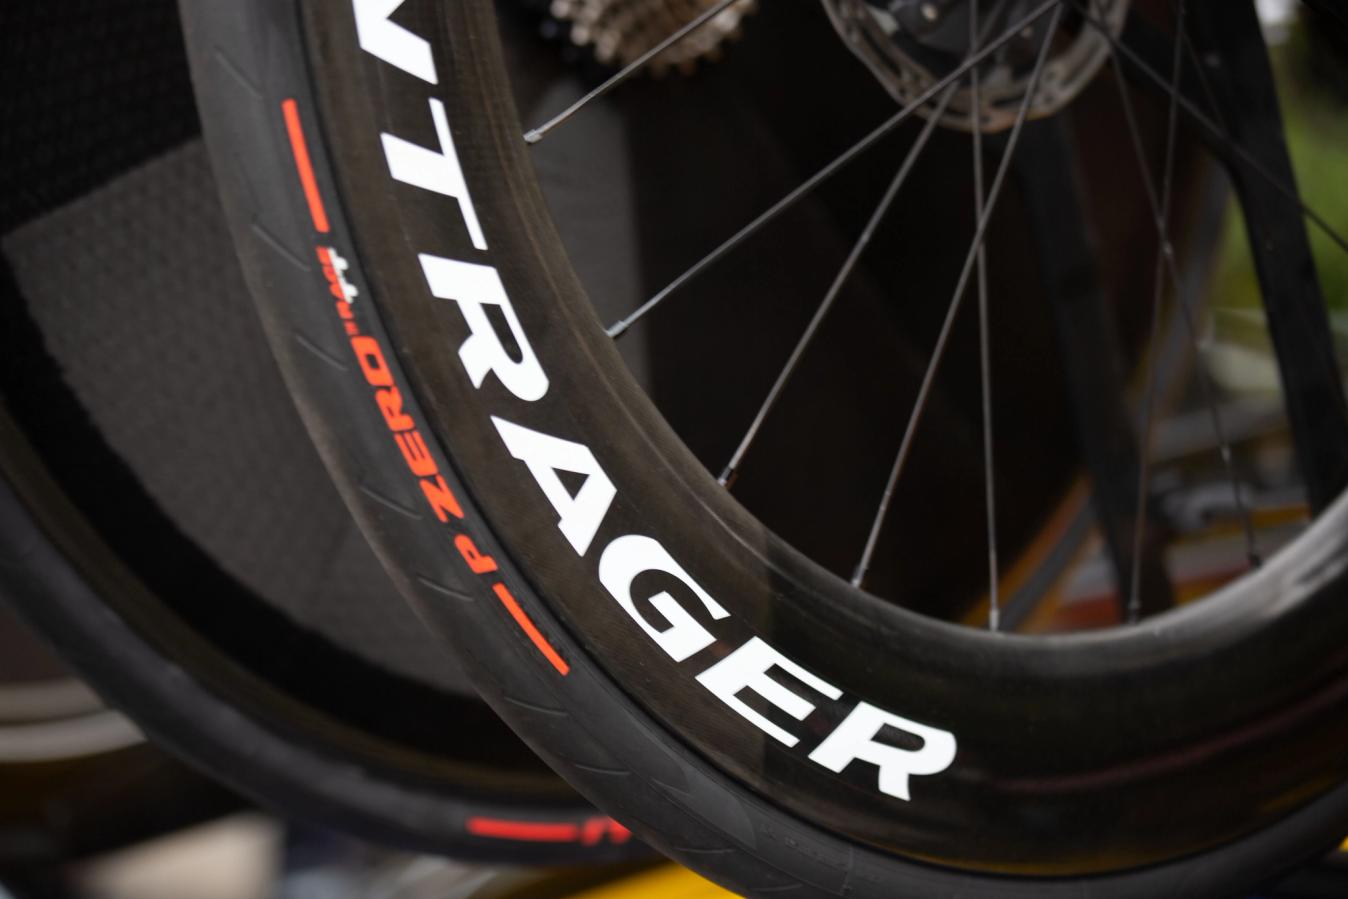 Lidl-Trek mixed things up with a different tyre widths and models for its front and rear wheels